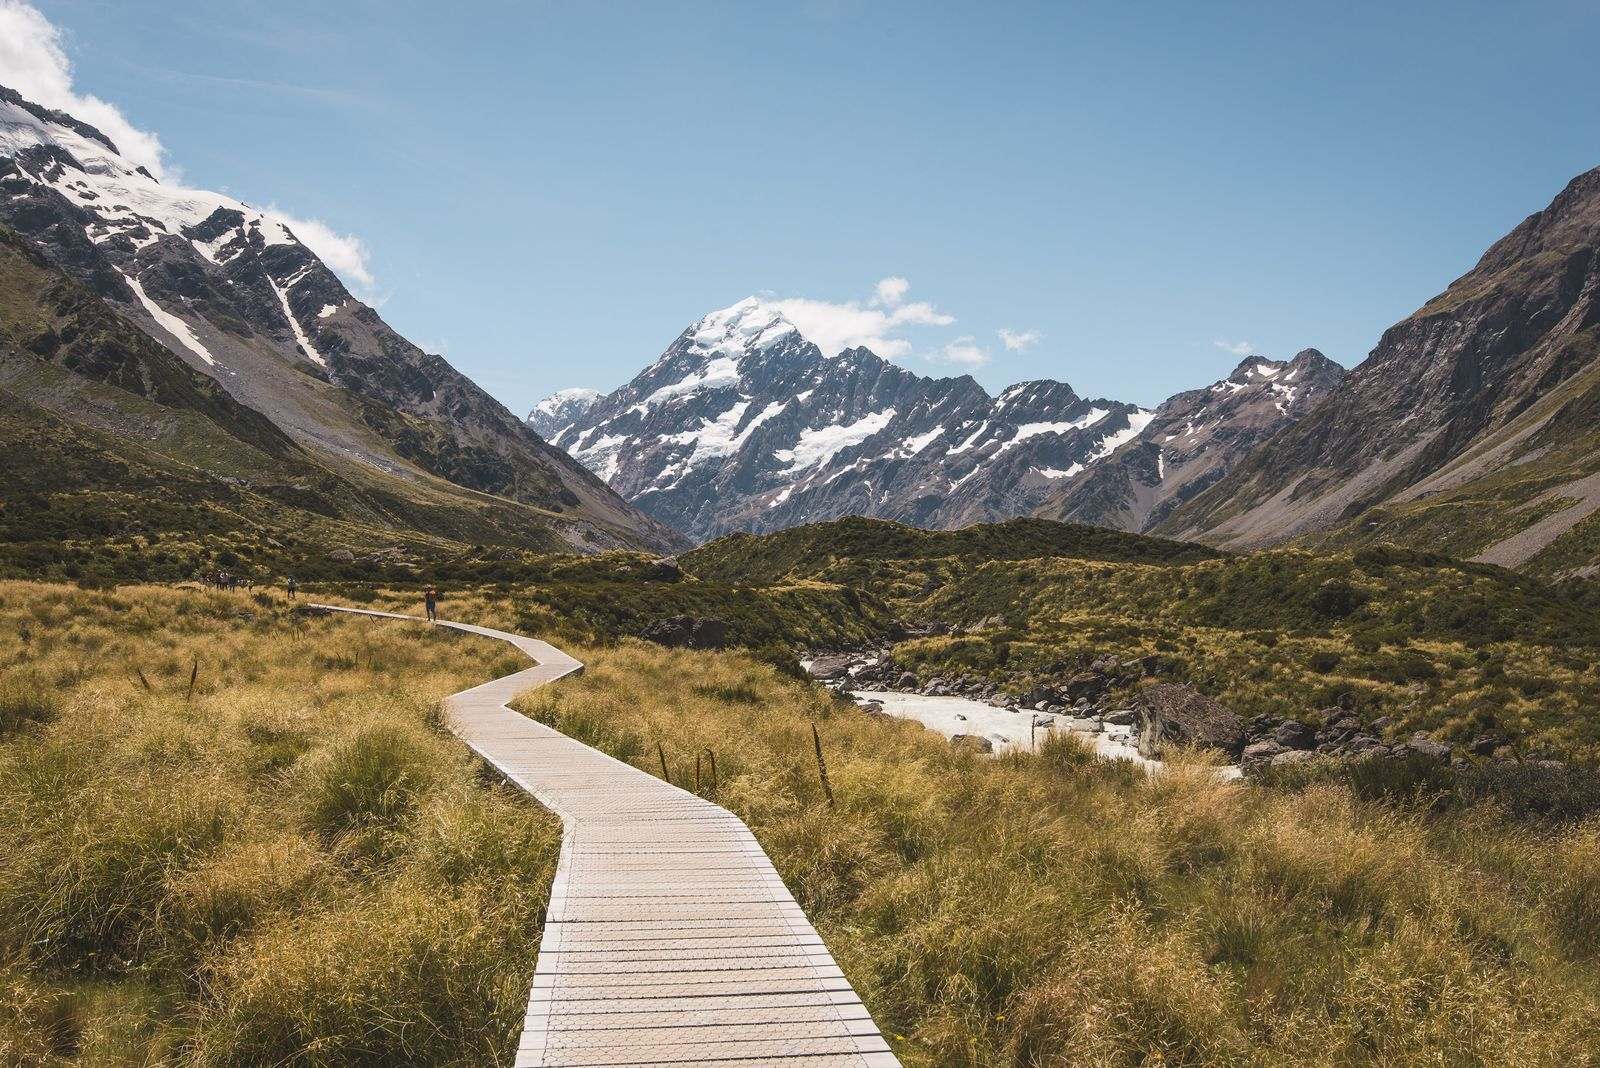 Work & Travel New Zealand: Get a Working Holiday Visa for New Zealand